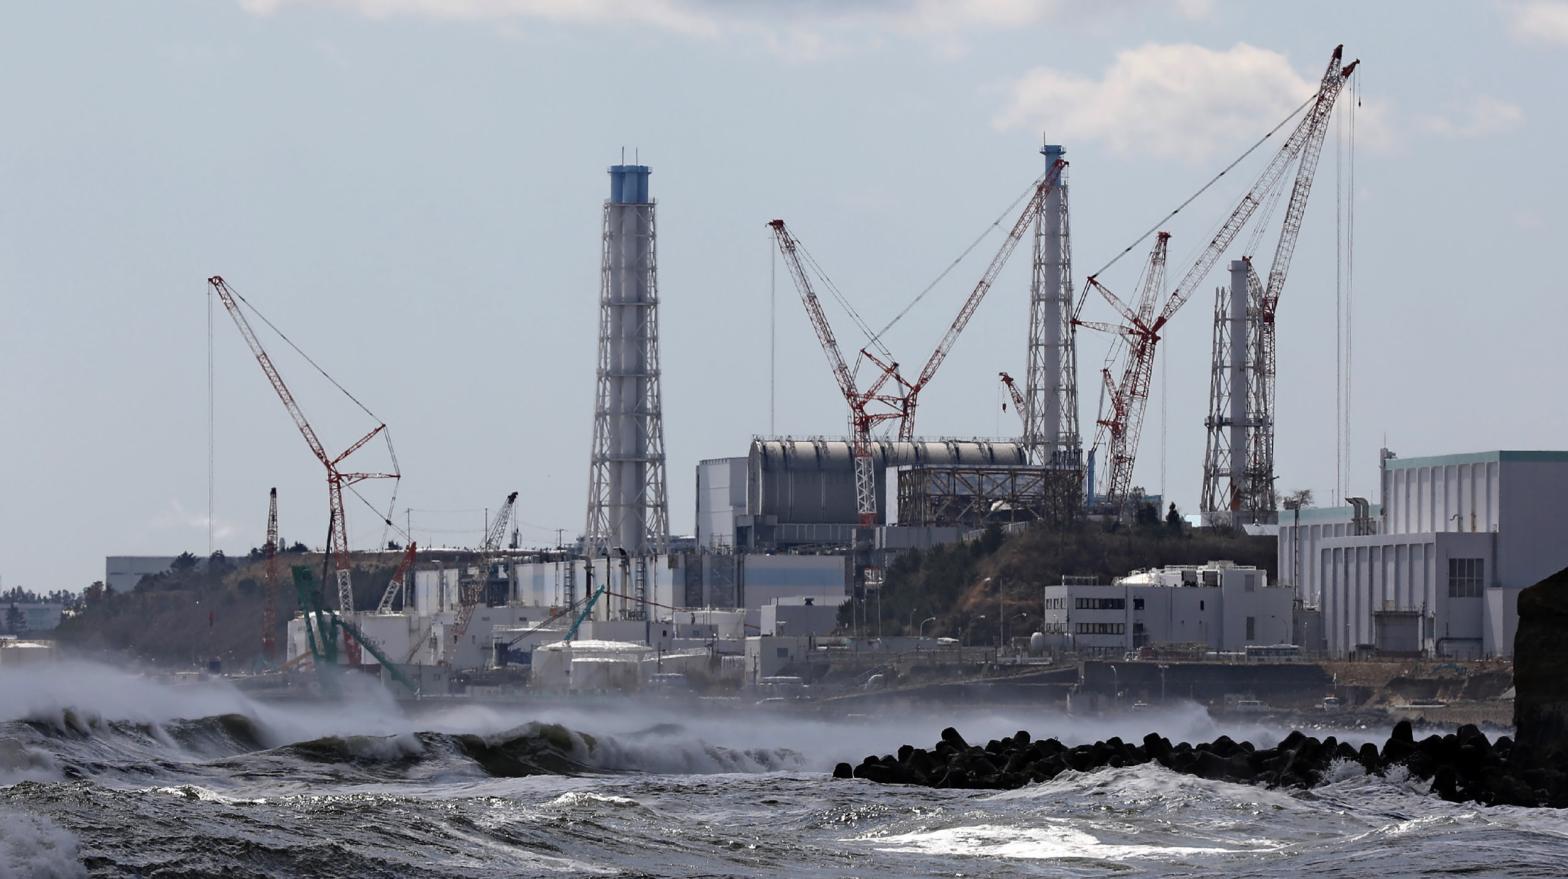 The Tokyo Electric Power Company's Fukushima Daiichi nuclear power plant is seen from Futaba Town, Fukushima prefecture on March 11, 2020. (Photo: STR/JIJI PRESS/AFP, Getty Images)